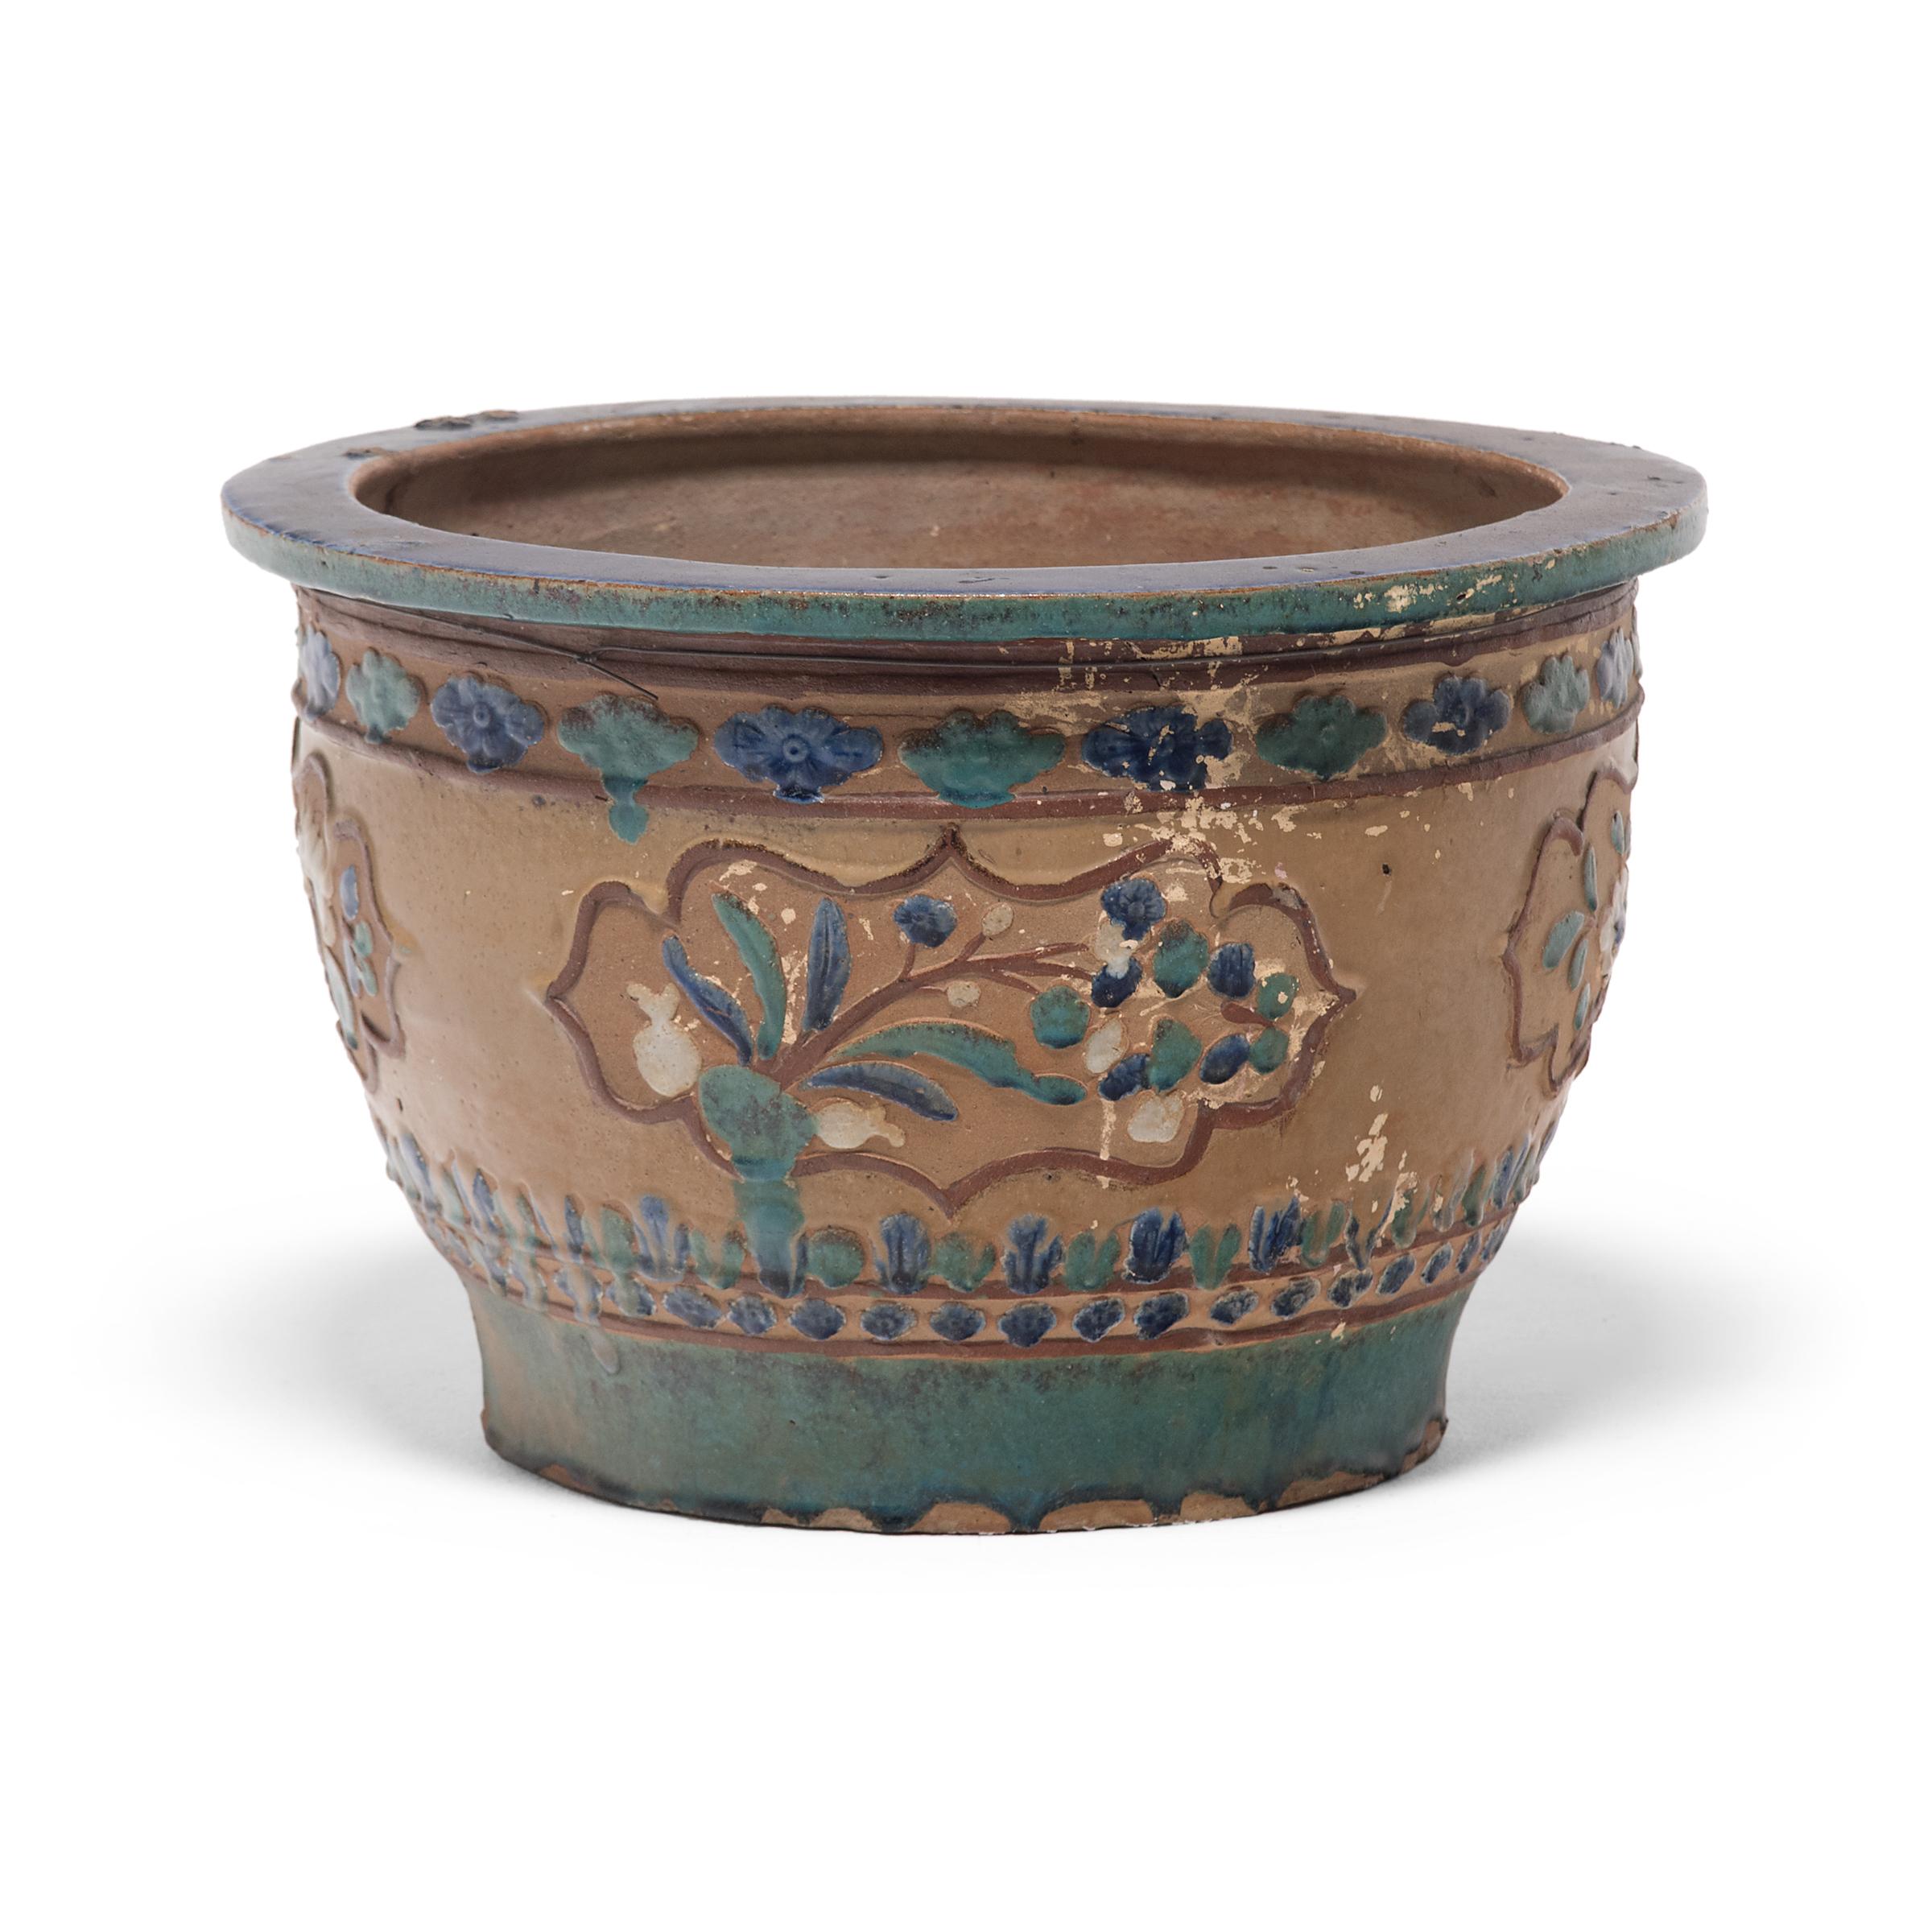 This lovely ceramic planter dates to the early 20th century and features low relief decoration colored by blue, green, and light brown overglaze. The basin has a footed base, a flat lip, and rounded sides patterned with bands of simple floral motifs